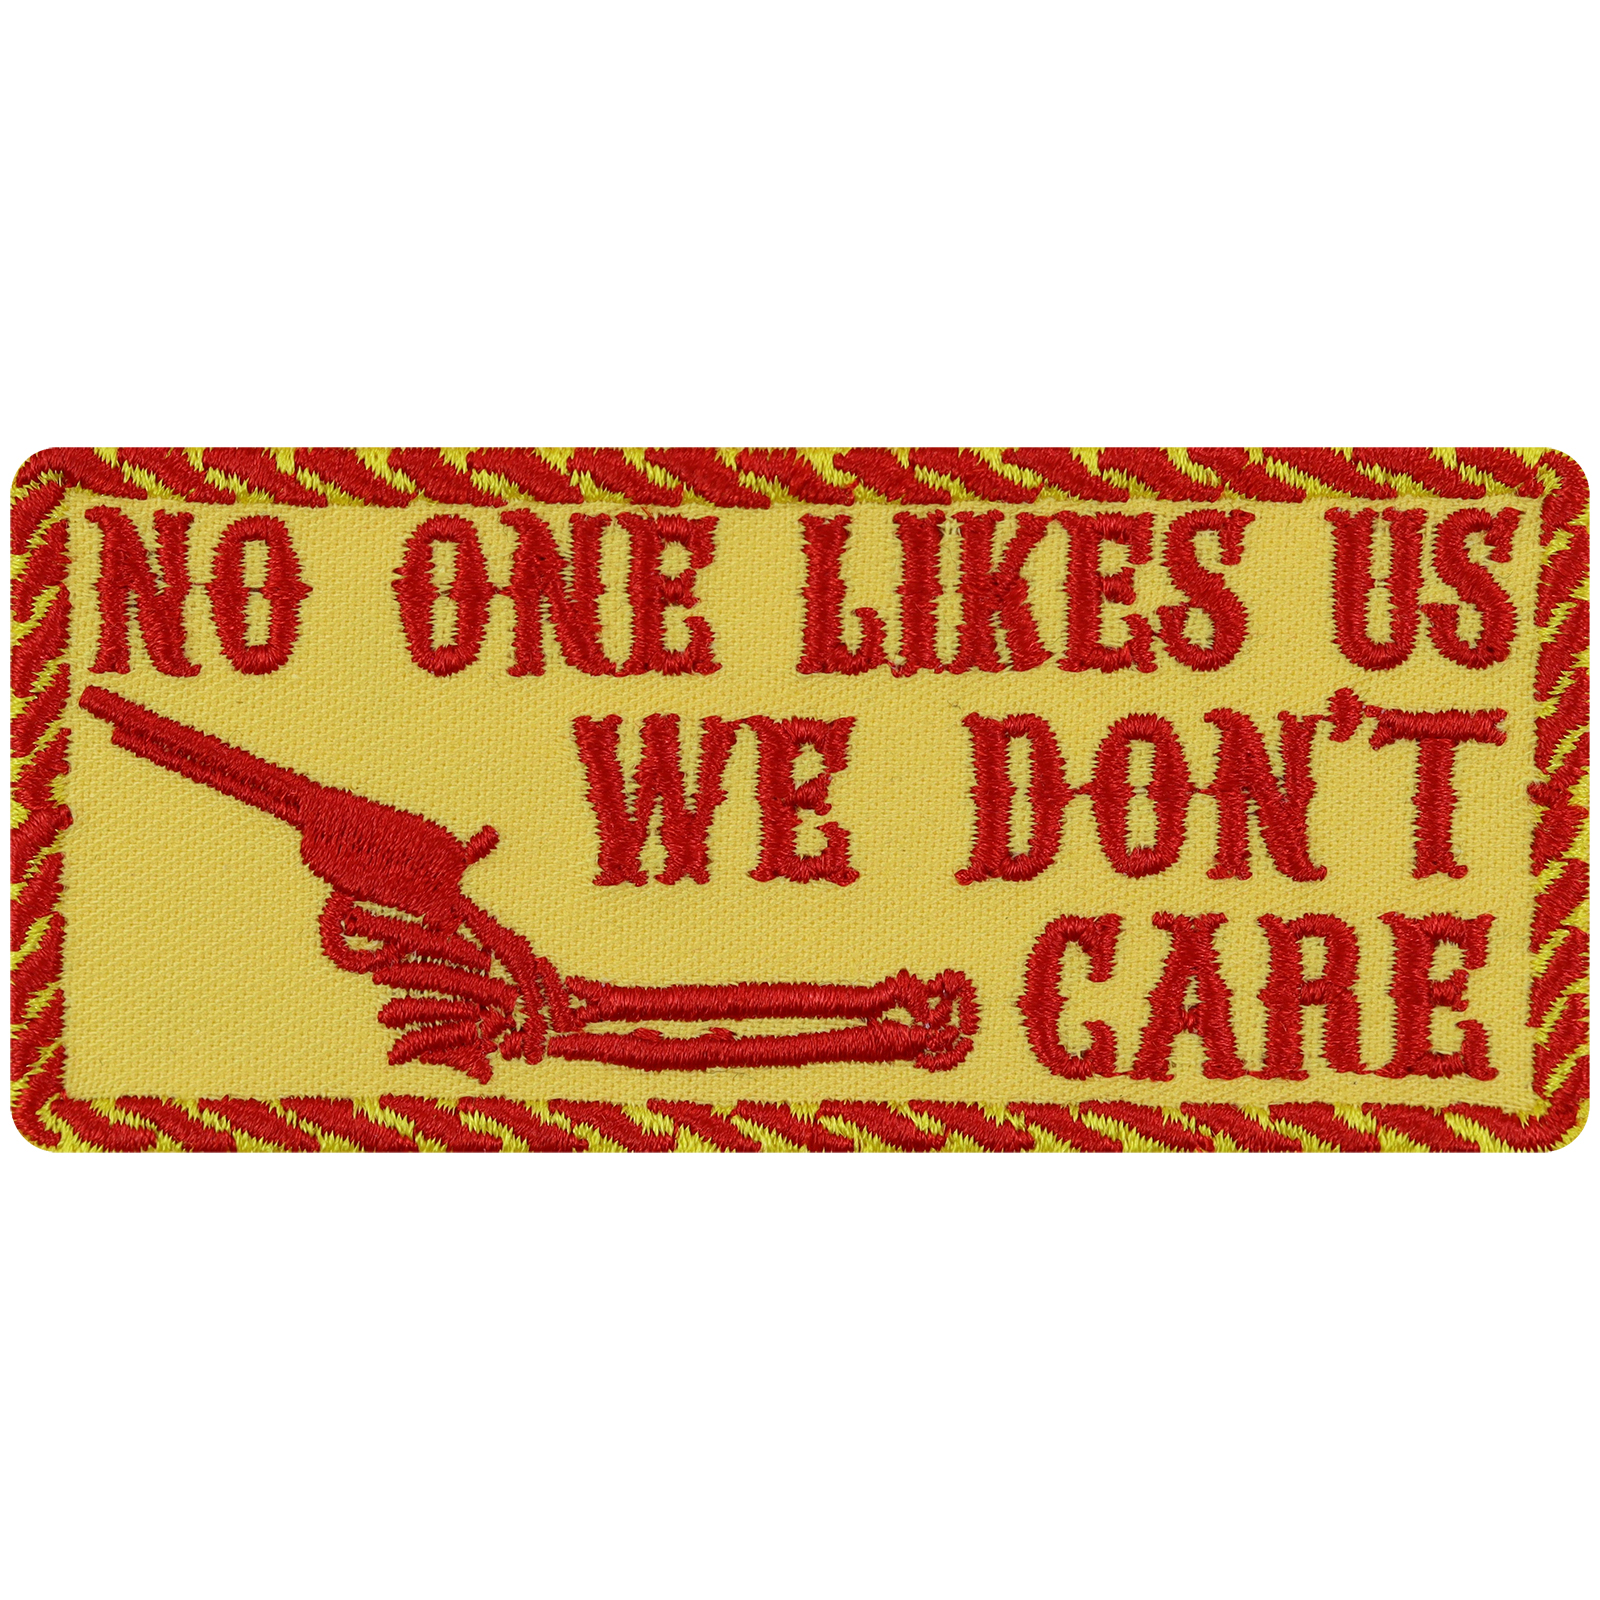 No one likes us we don't care - Patch